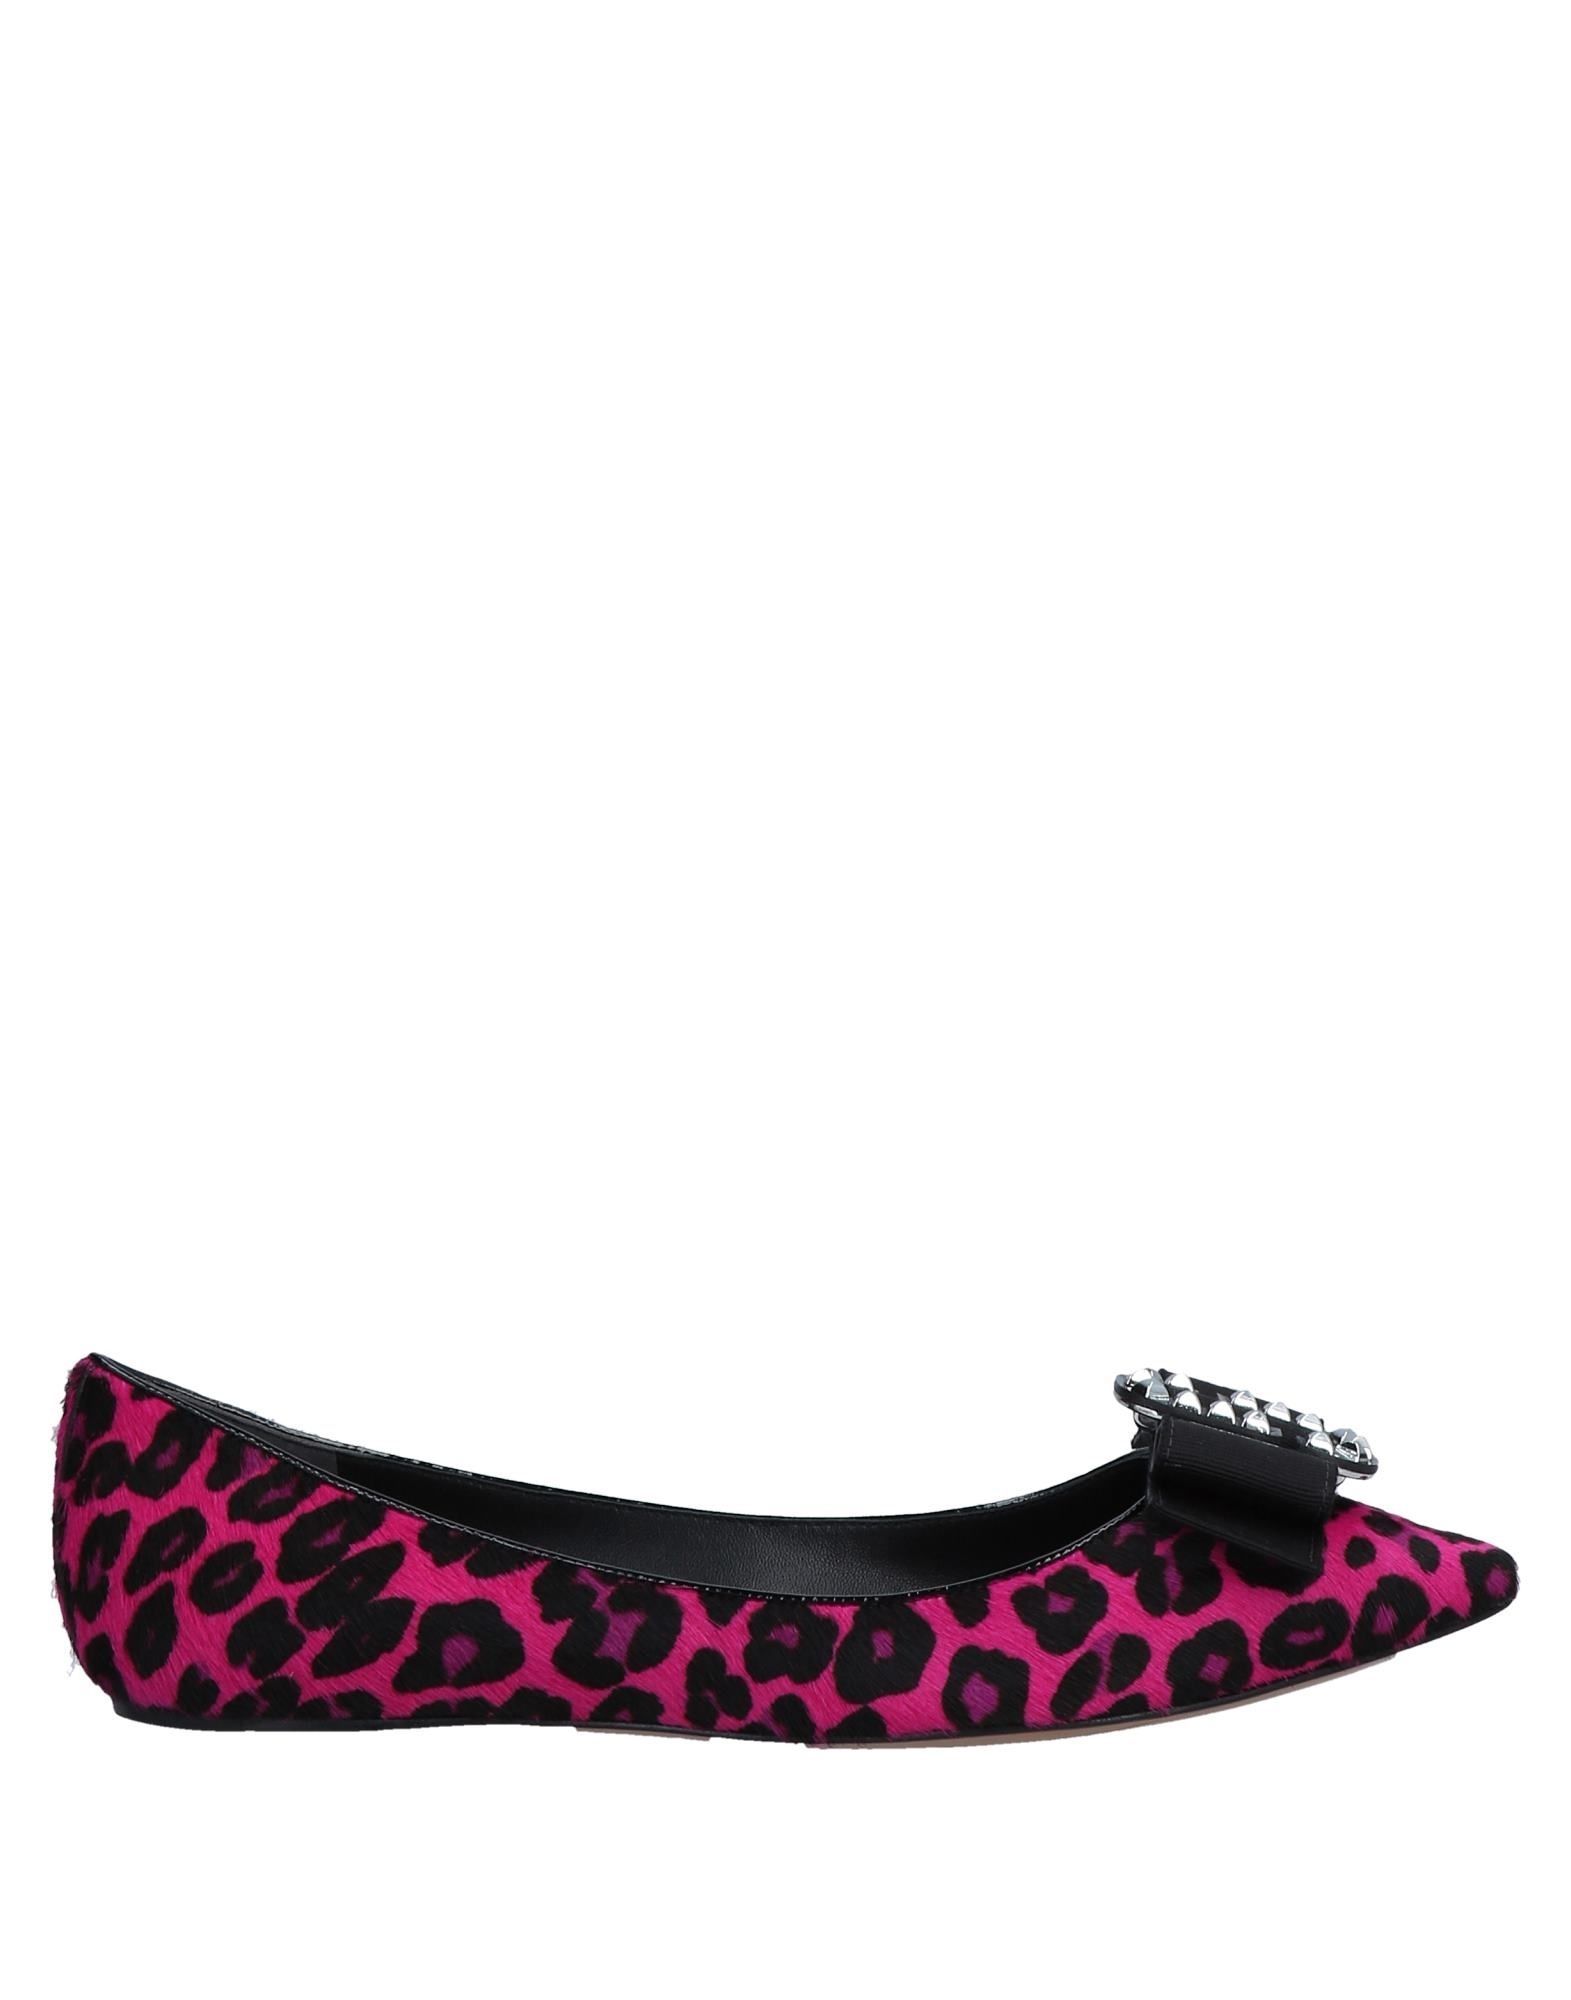 leather, calf hair, bow-detailed, leopard-print, narrow toeline, flat, leather lining, leather/rubber sole, contains non-textile parts of animal origin, large sized